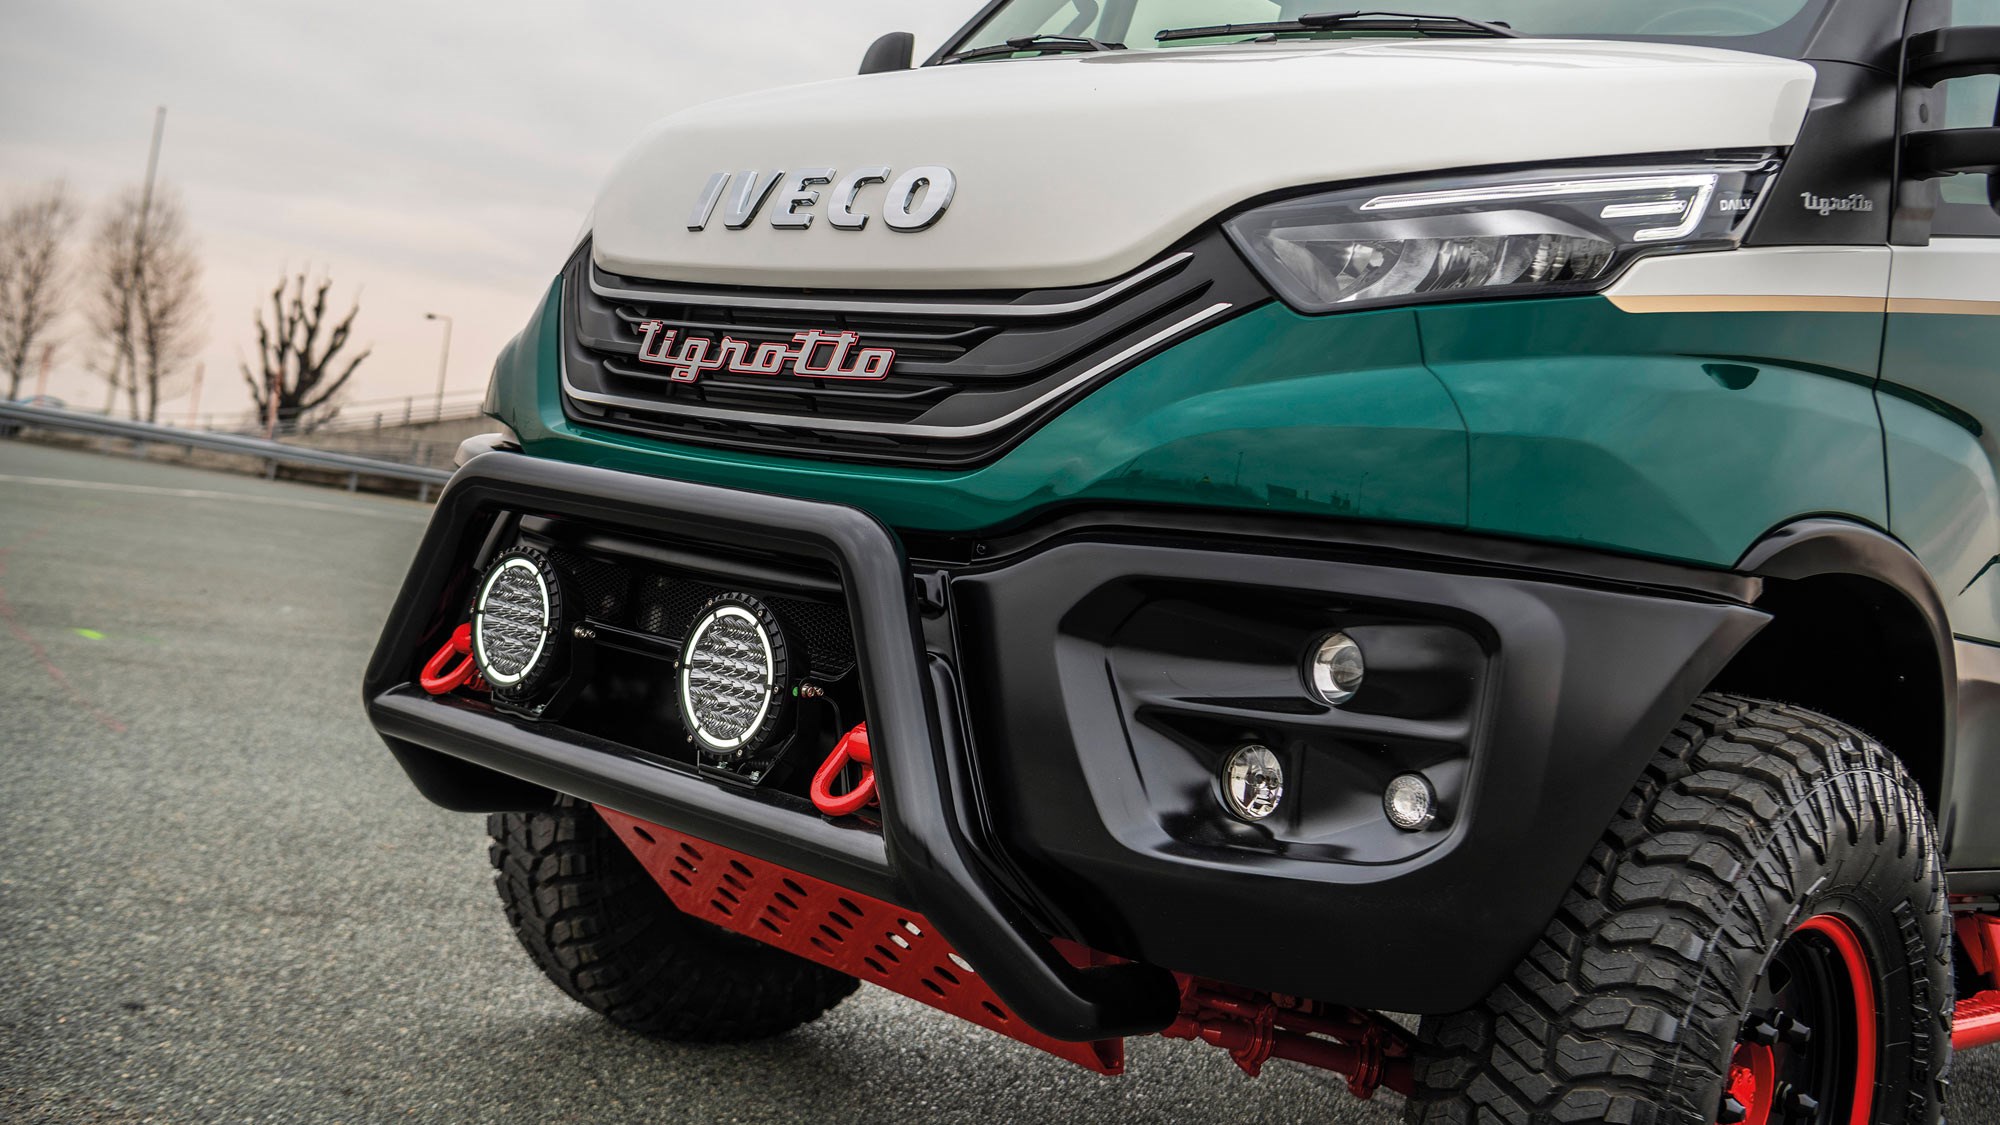 Iveco Daily 4x4 Tigrotto: the retro off-road van you didn't know